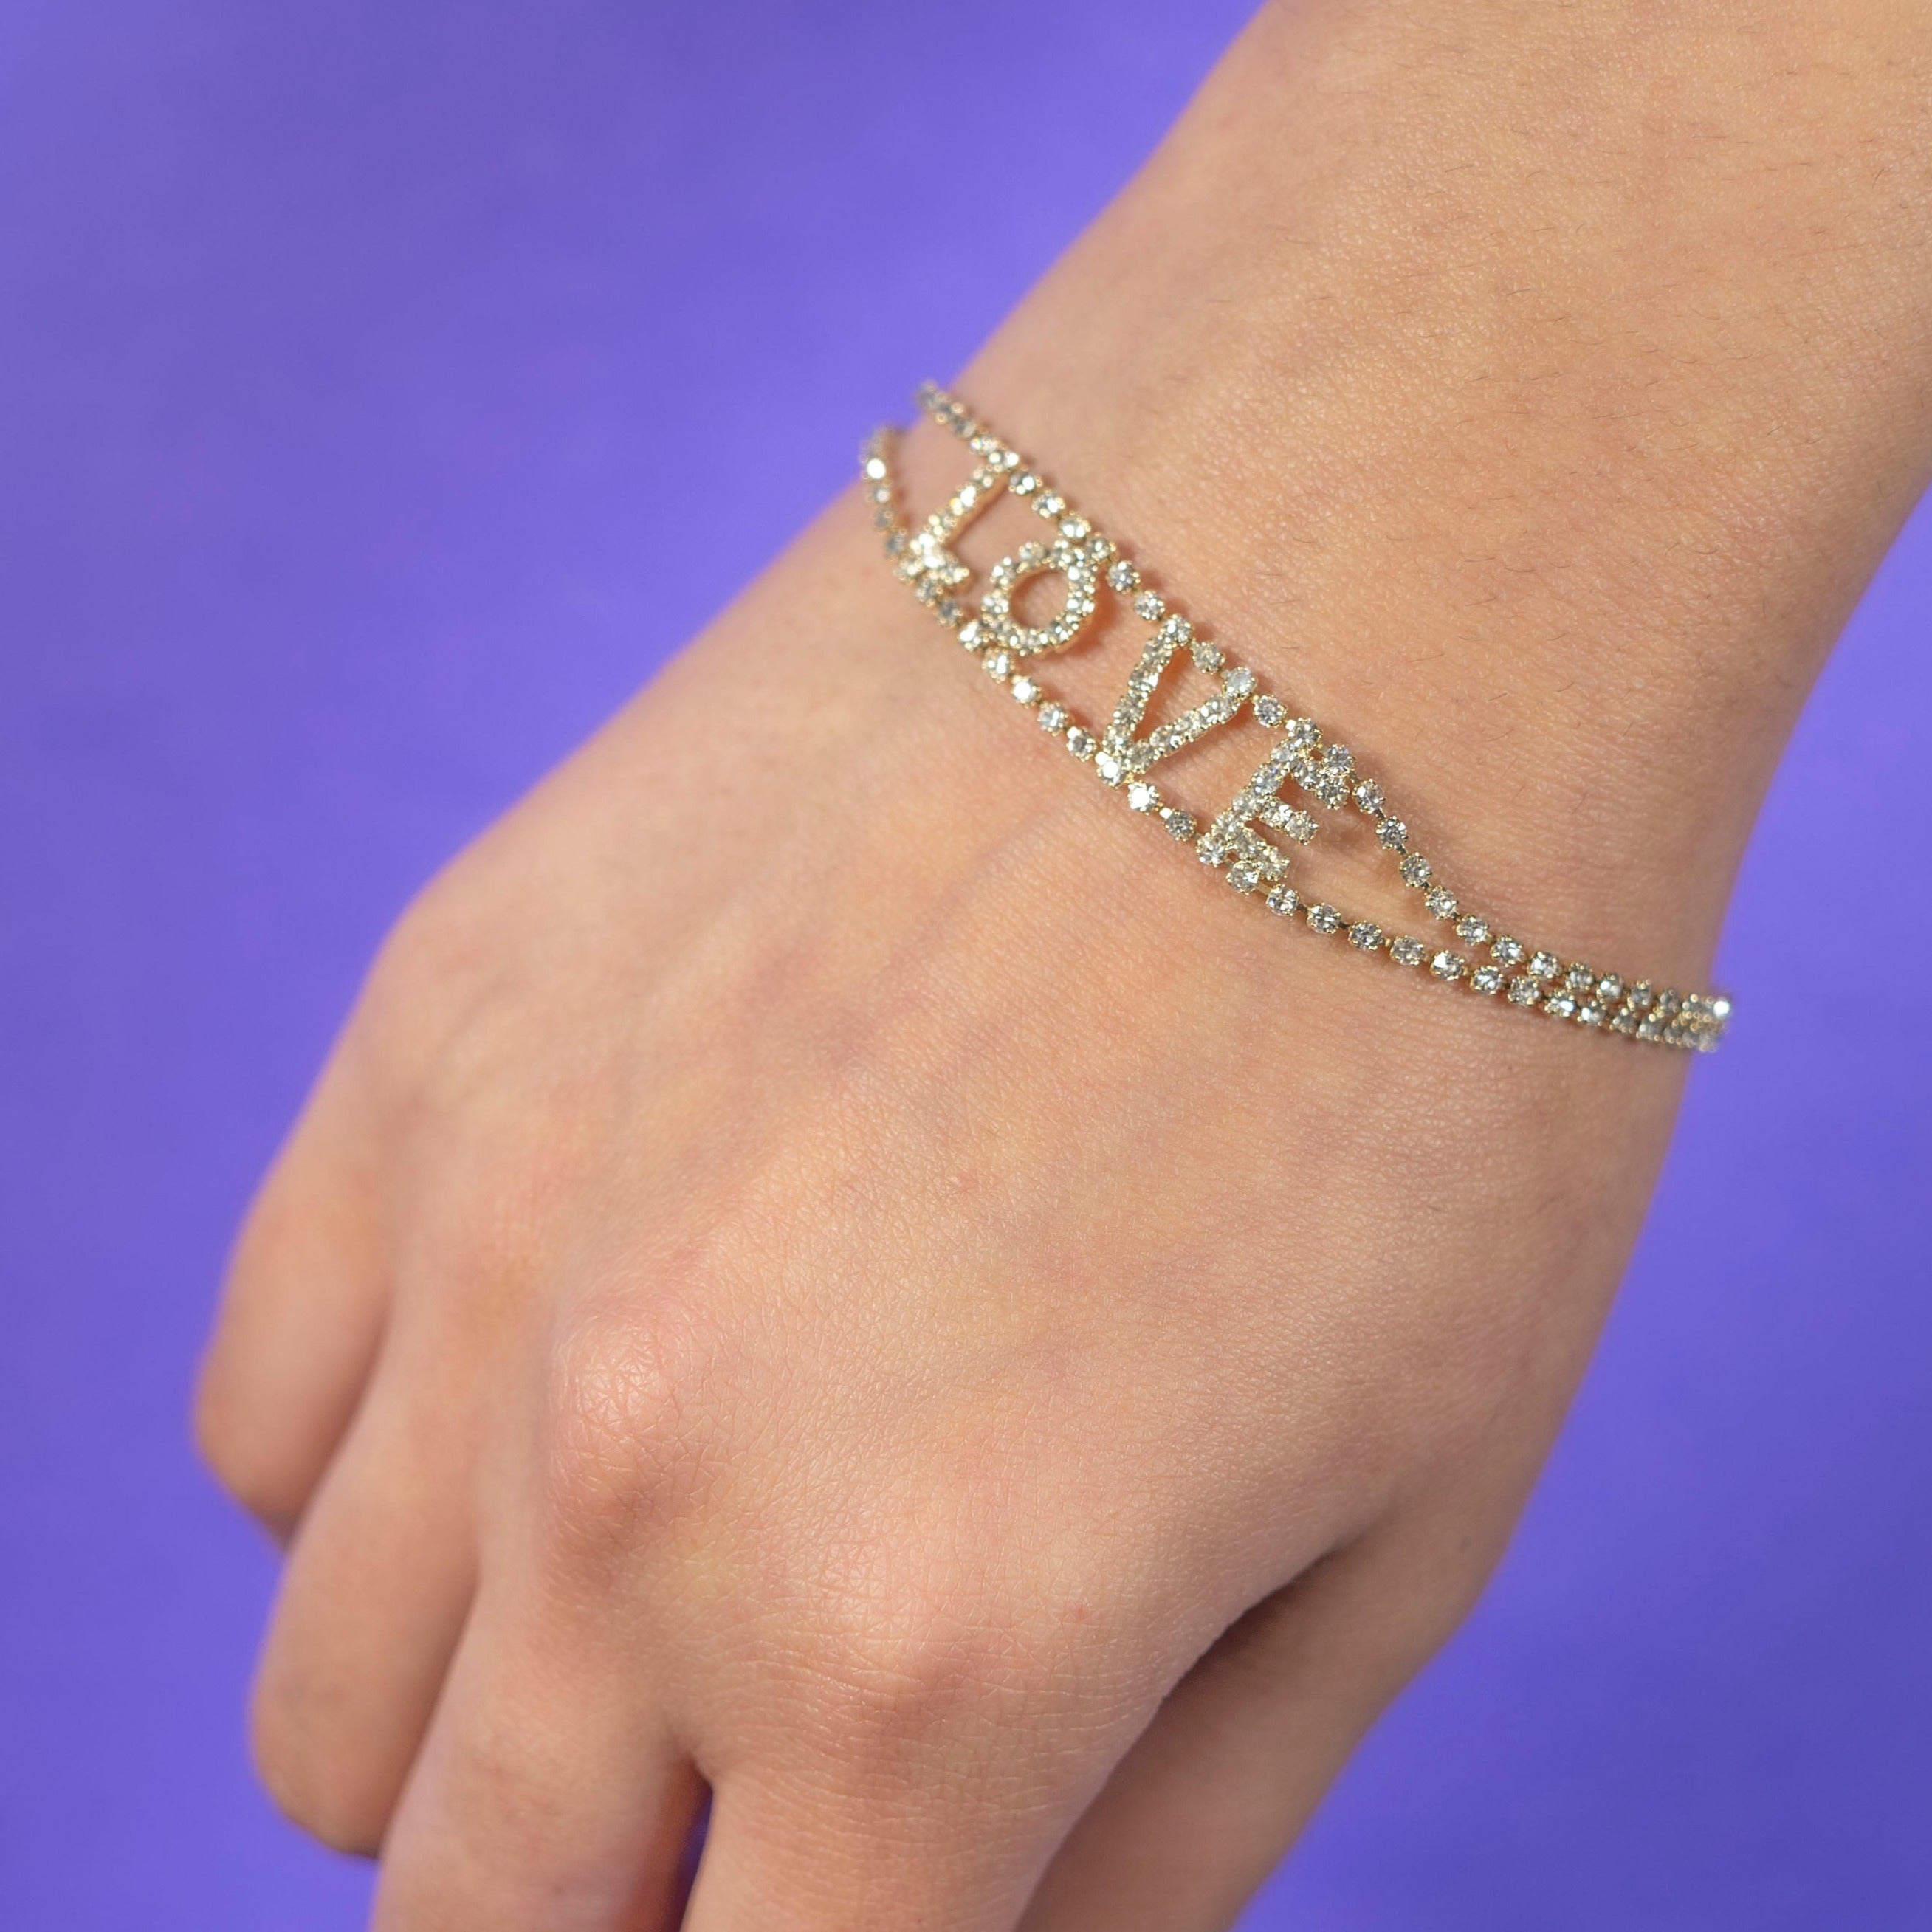 How To Sell Cartier Love Bracelets  Sell Quickly For The Best Prices